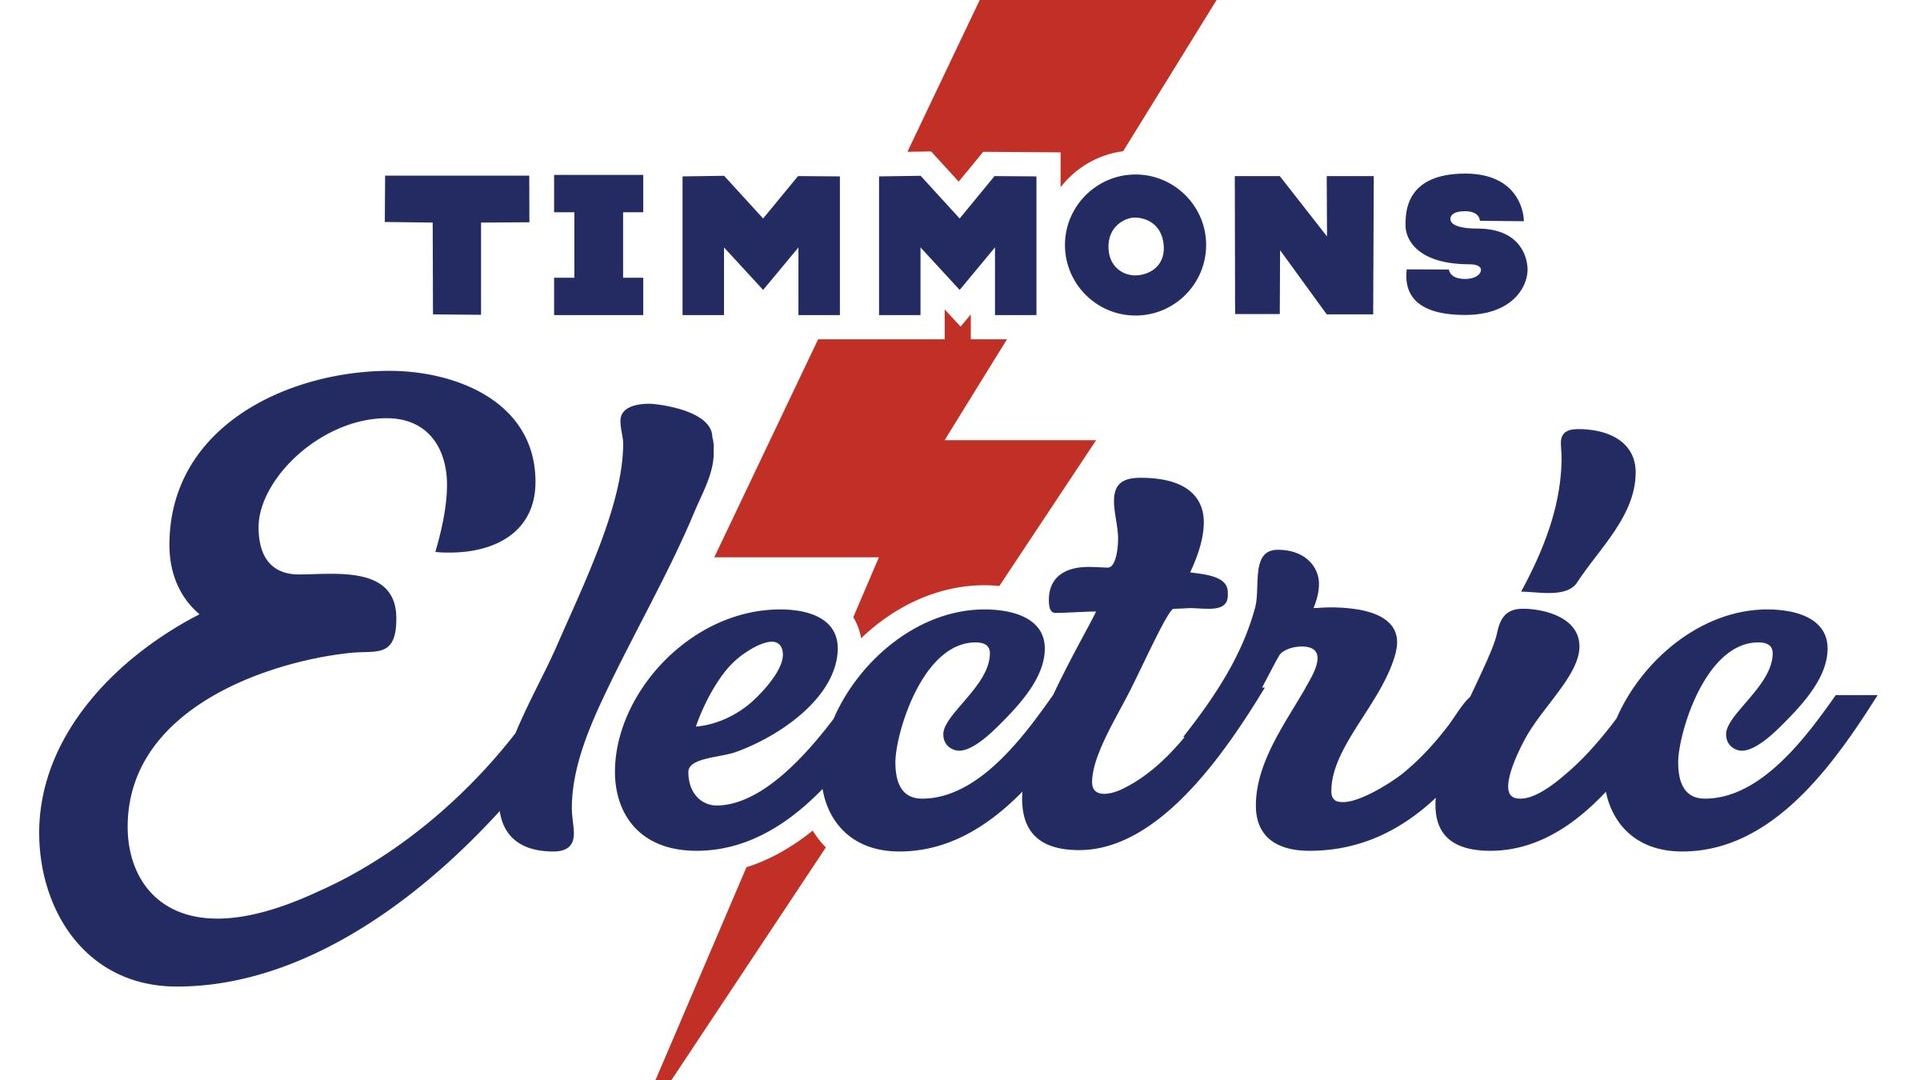 Timmons Electric Staff